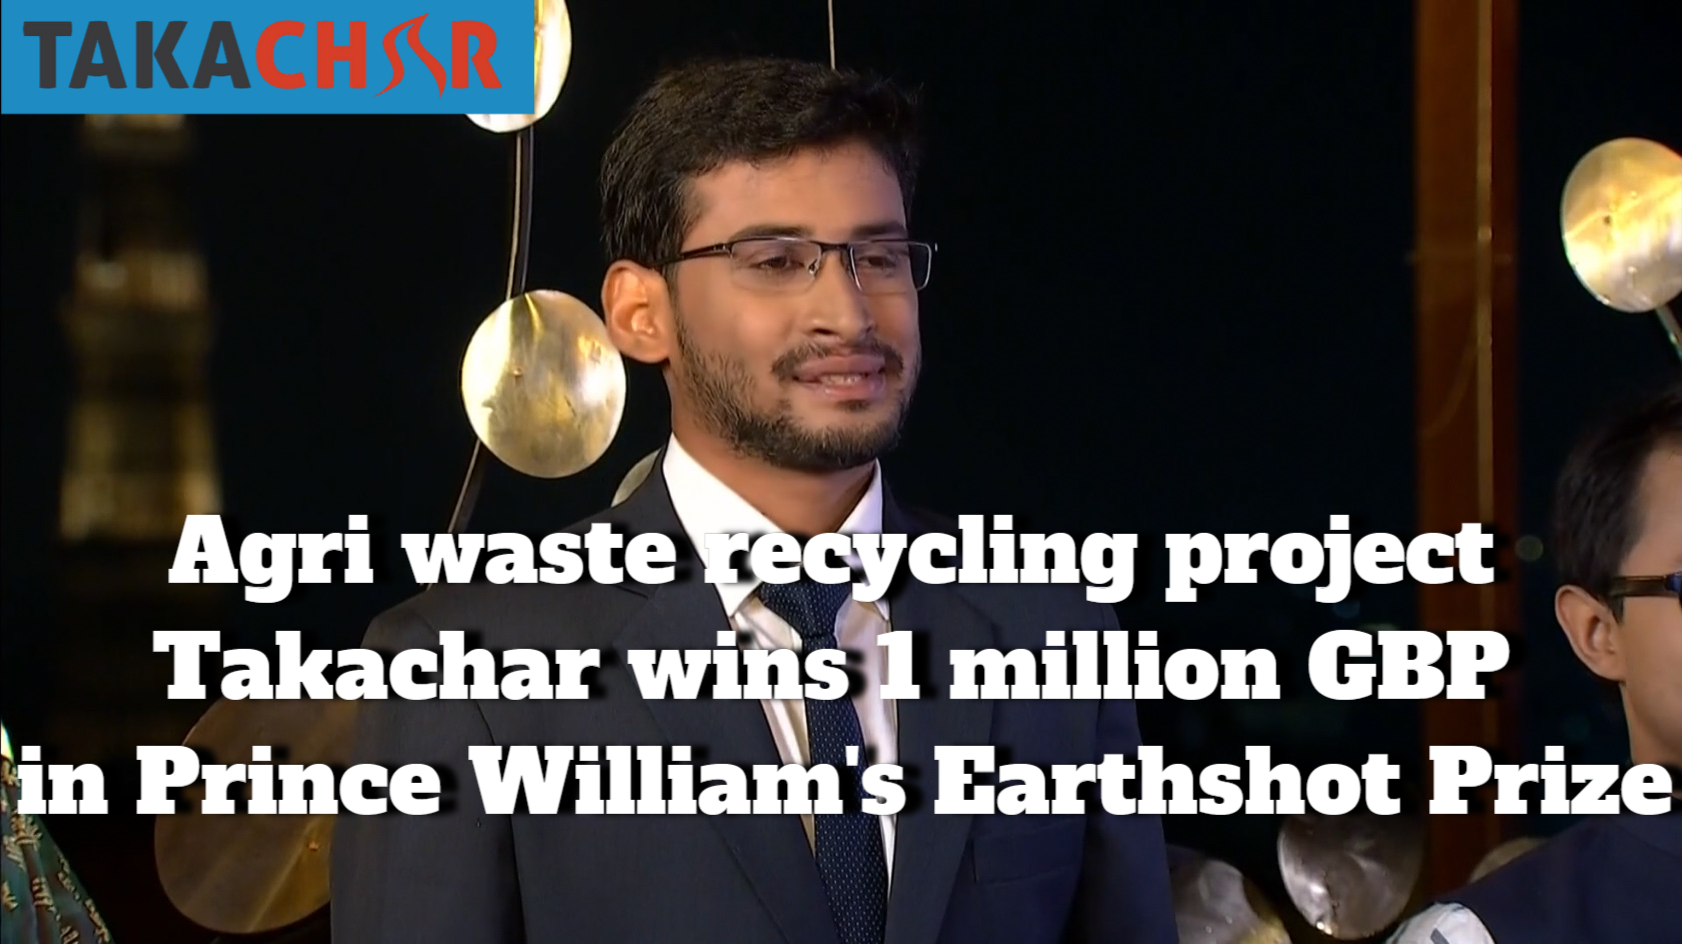 Takachar, an Indian agri waste recycling project, wins 1 million GBP in the Prince William’s Earthshot Prize